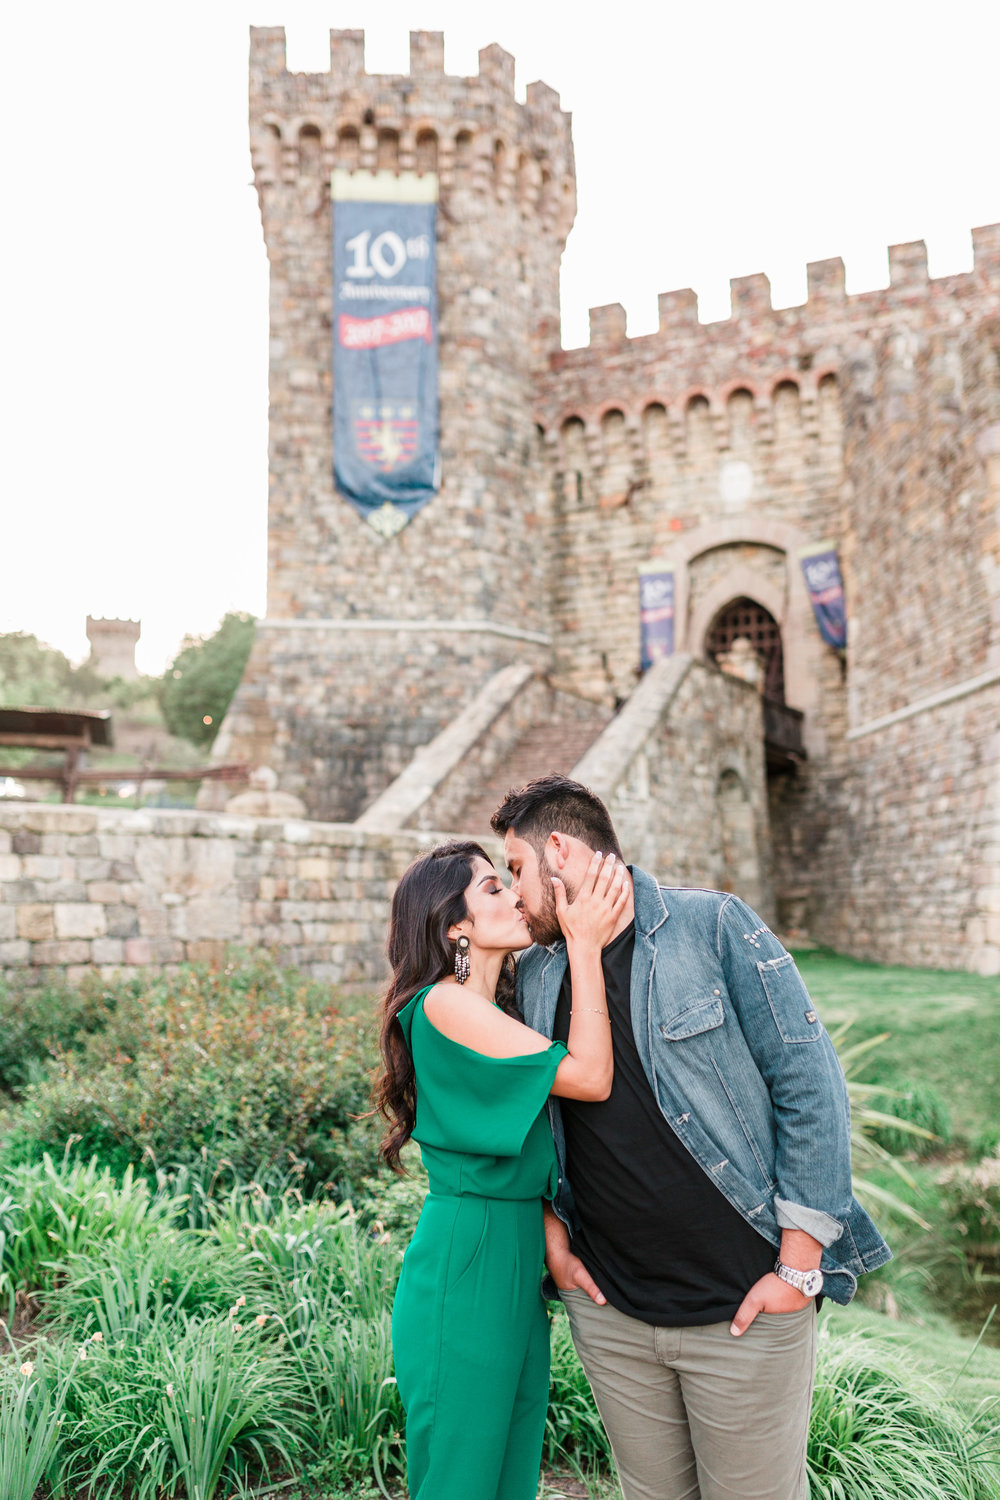 Sandra and Emmanuel live in the greater Sacramento area but they wanted to do their engagement session in Napa Valley.  A few weeks prior to our session, they visited some wineries and decided on doing the photos at the Castello di Amorosa.